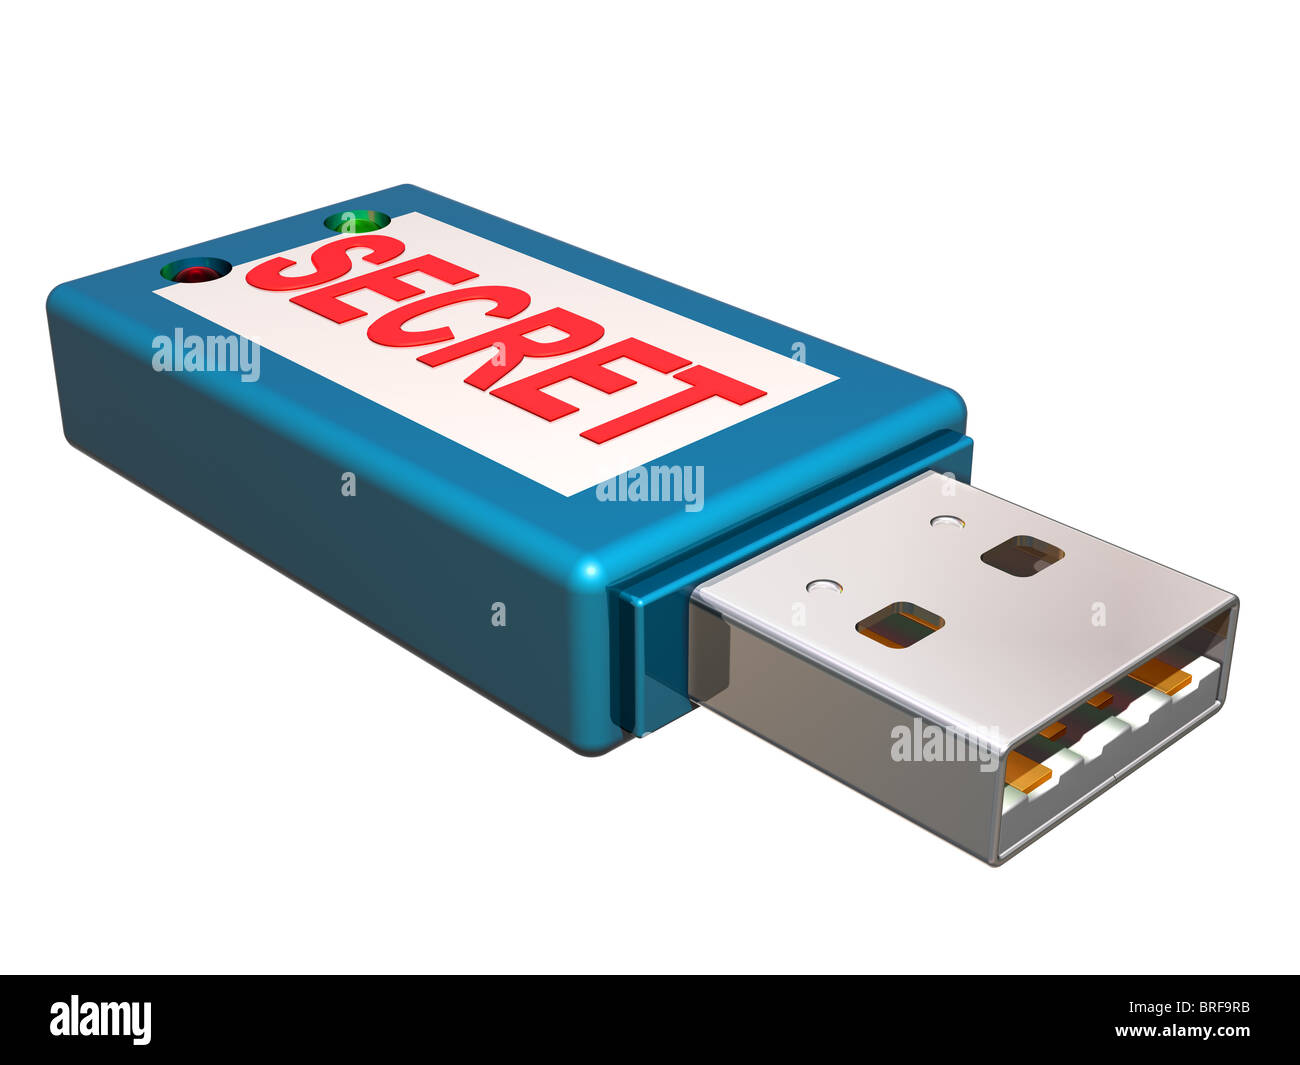 Isolated illustration of a memory stick containing secret information Stock Photo